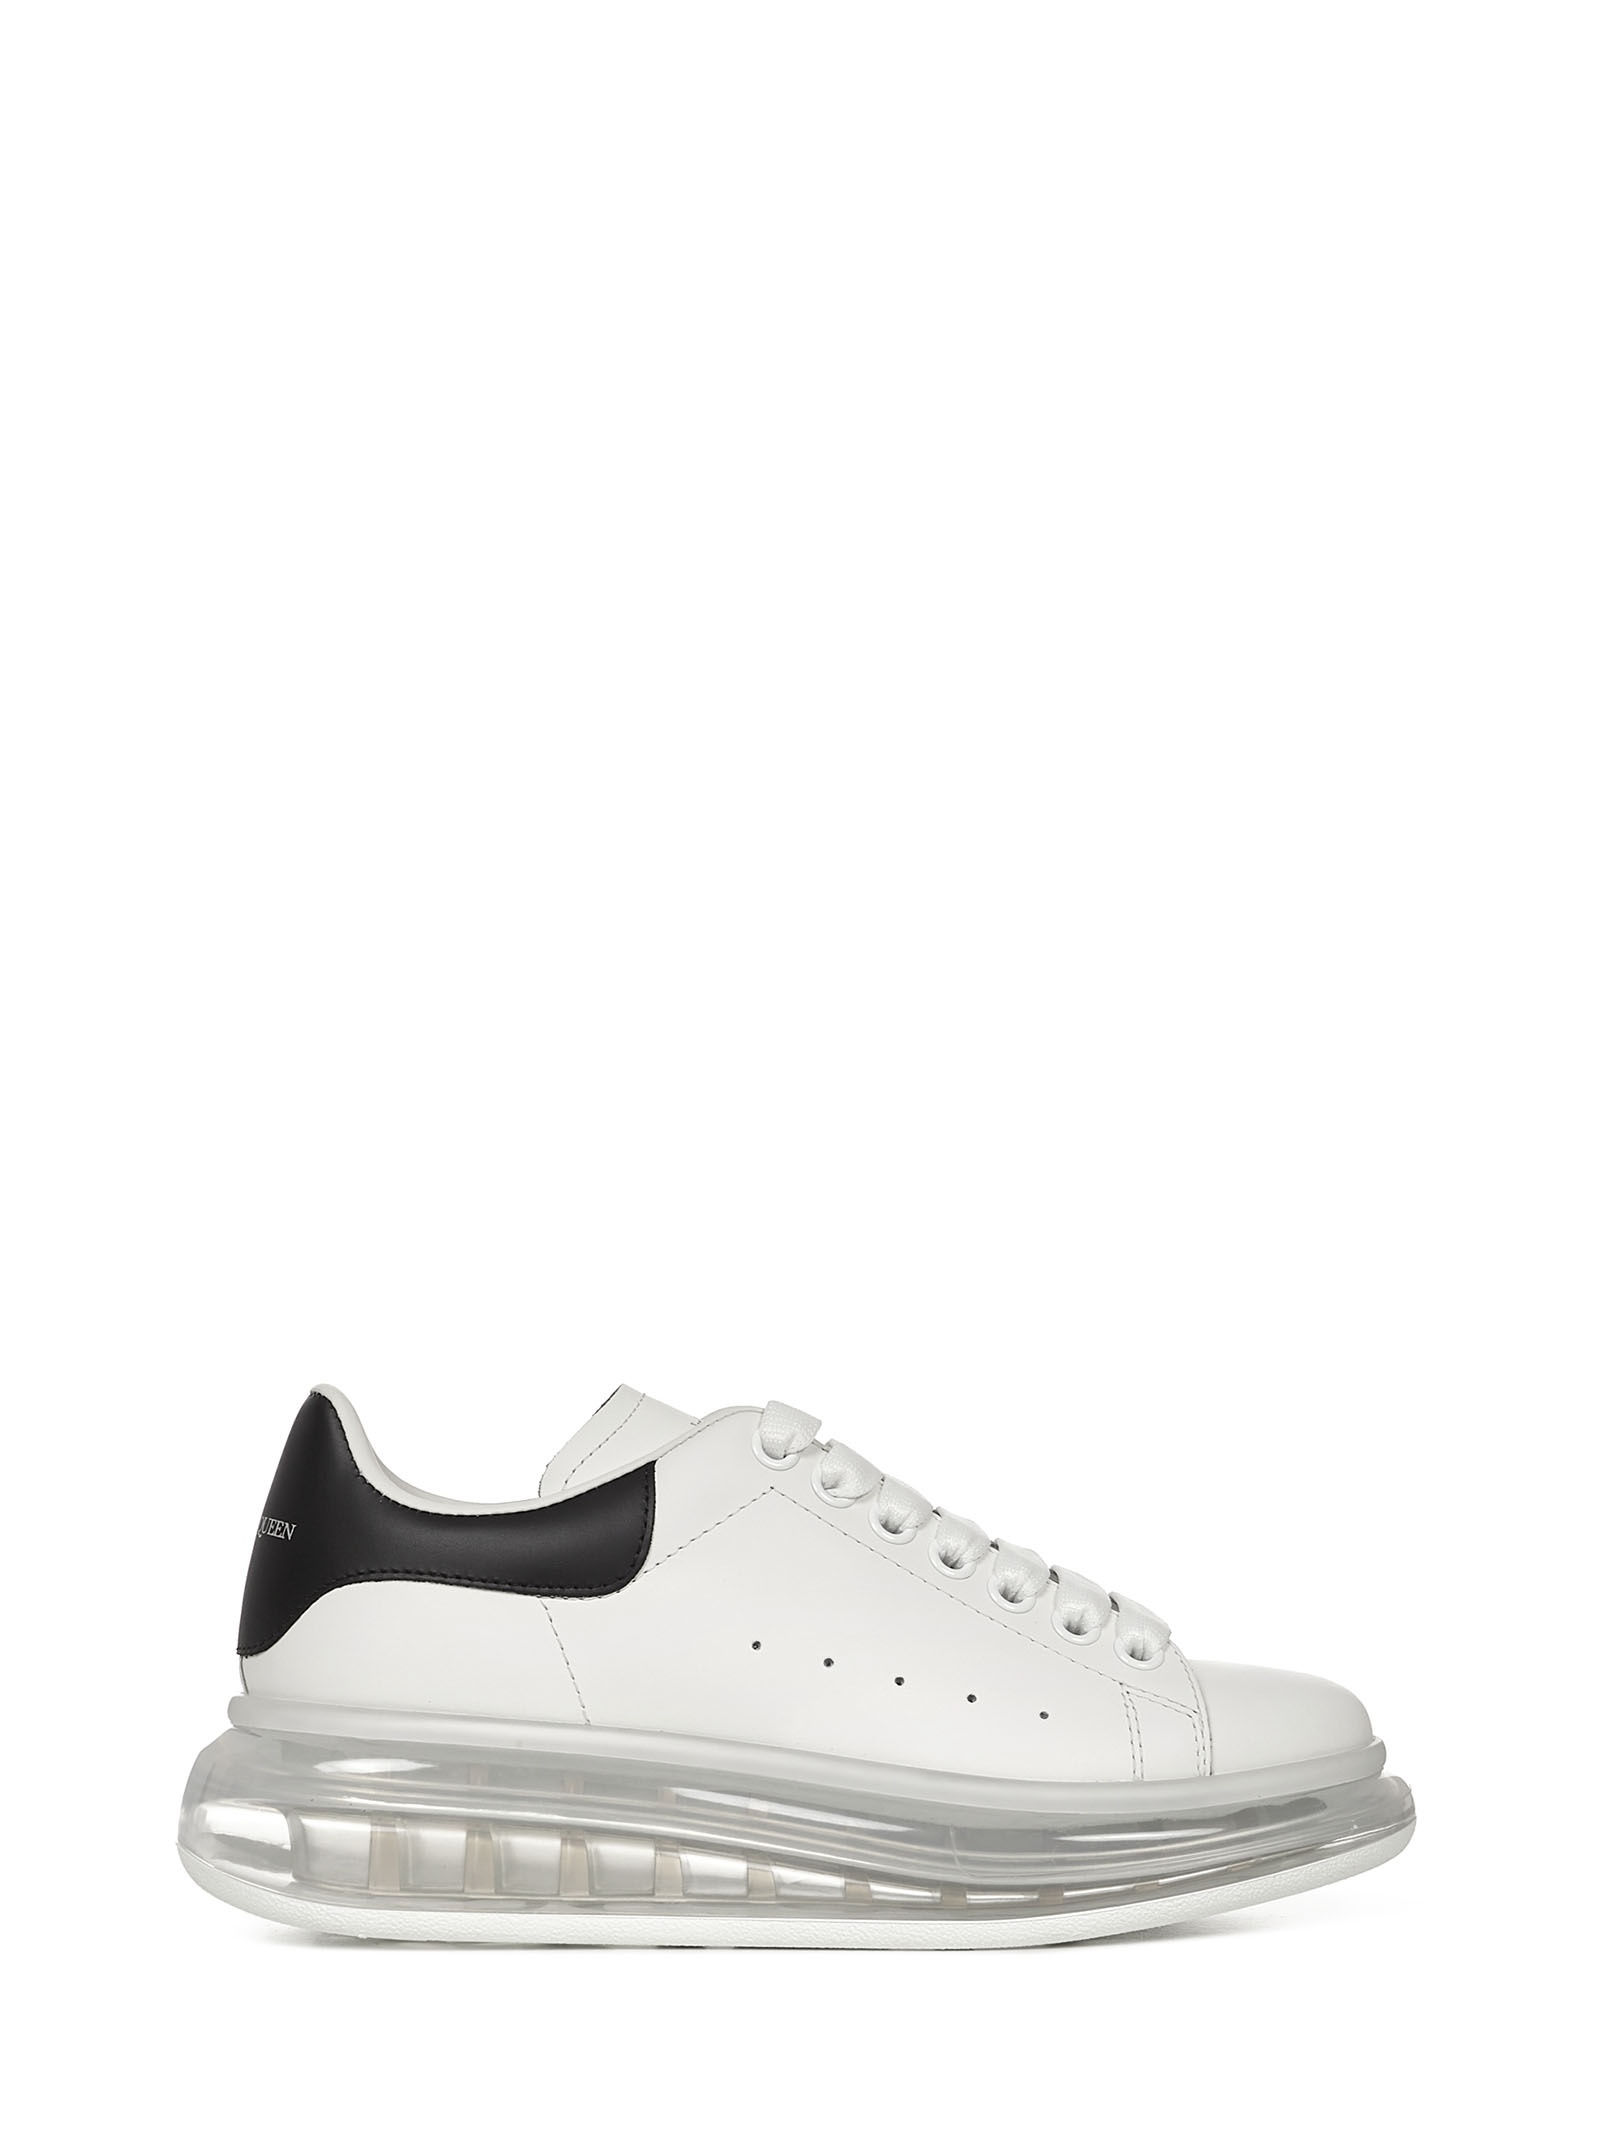 Larry sneakers in white calfskin with black leather insert on the heel and transparent oversized sol - 1